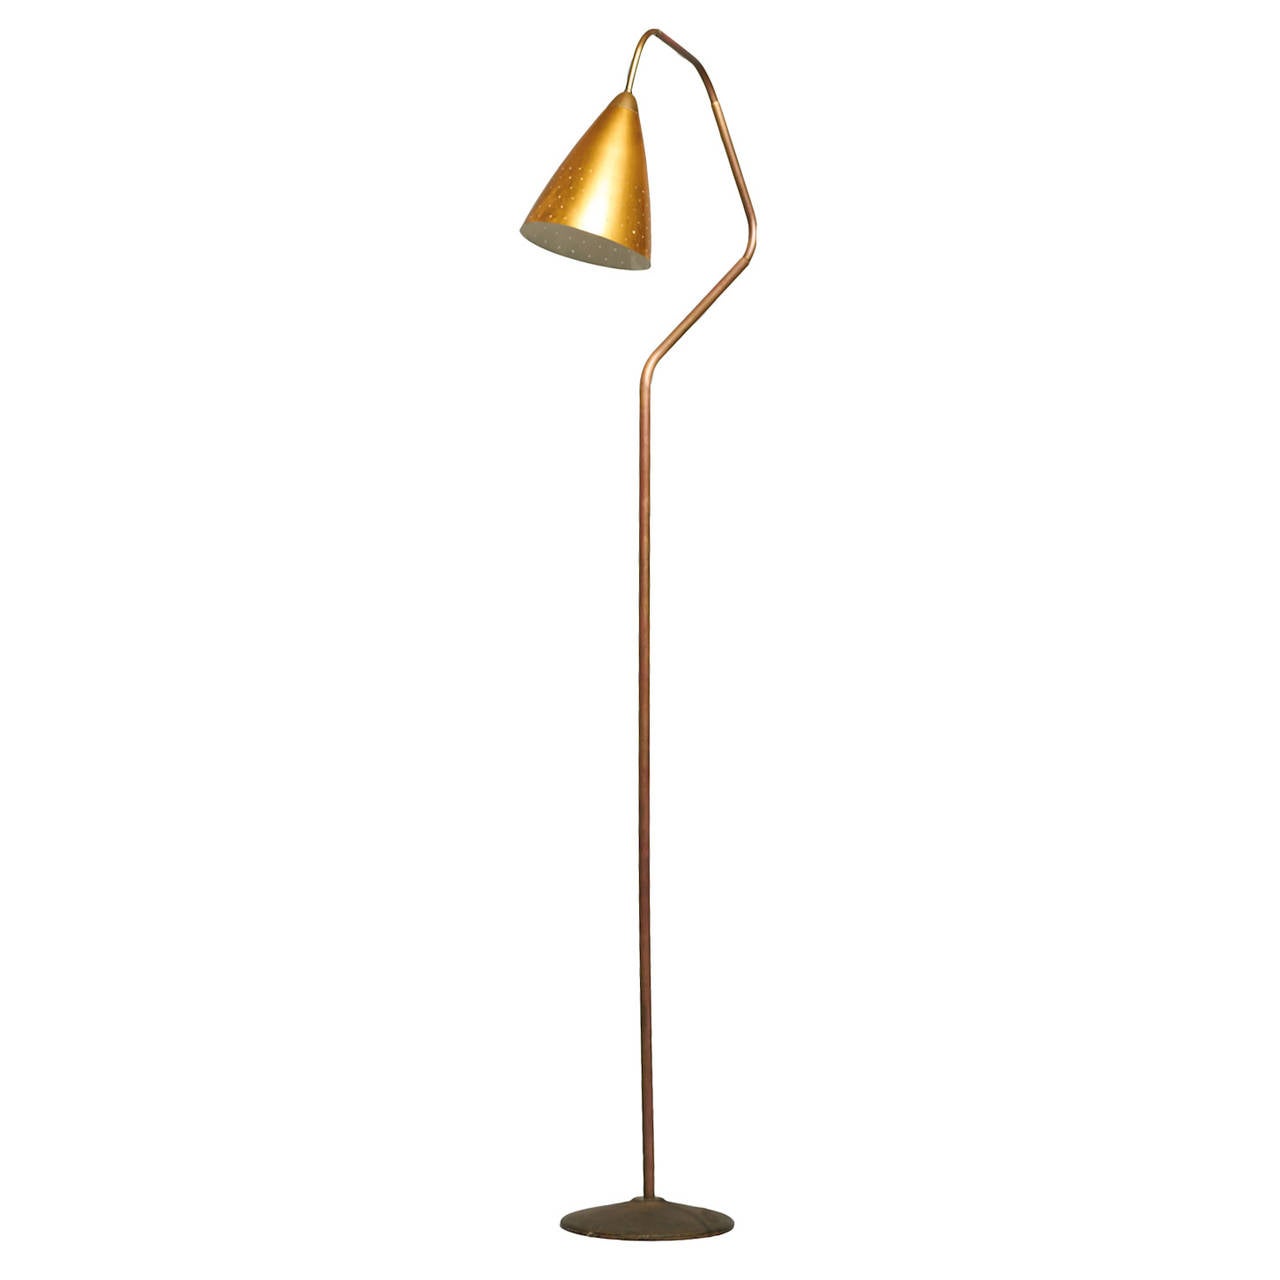 A brass floor lamp by Karl Hagenauer. Three joints allow for adjustable shape and direction. Patinated cast metal foot, brass tube, perforated metal shade, and white lacquered interior.